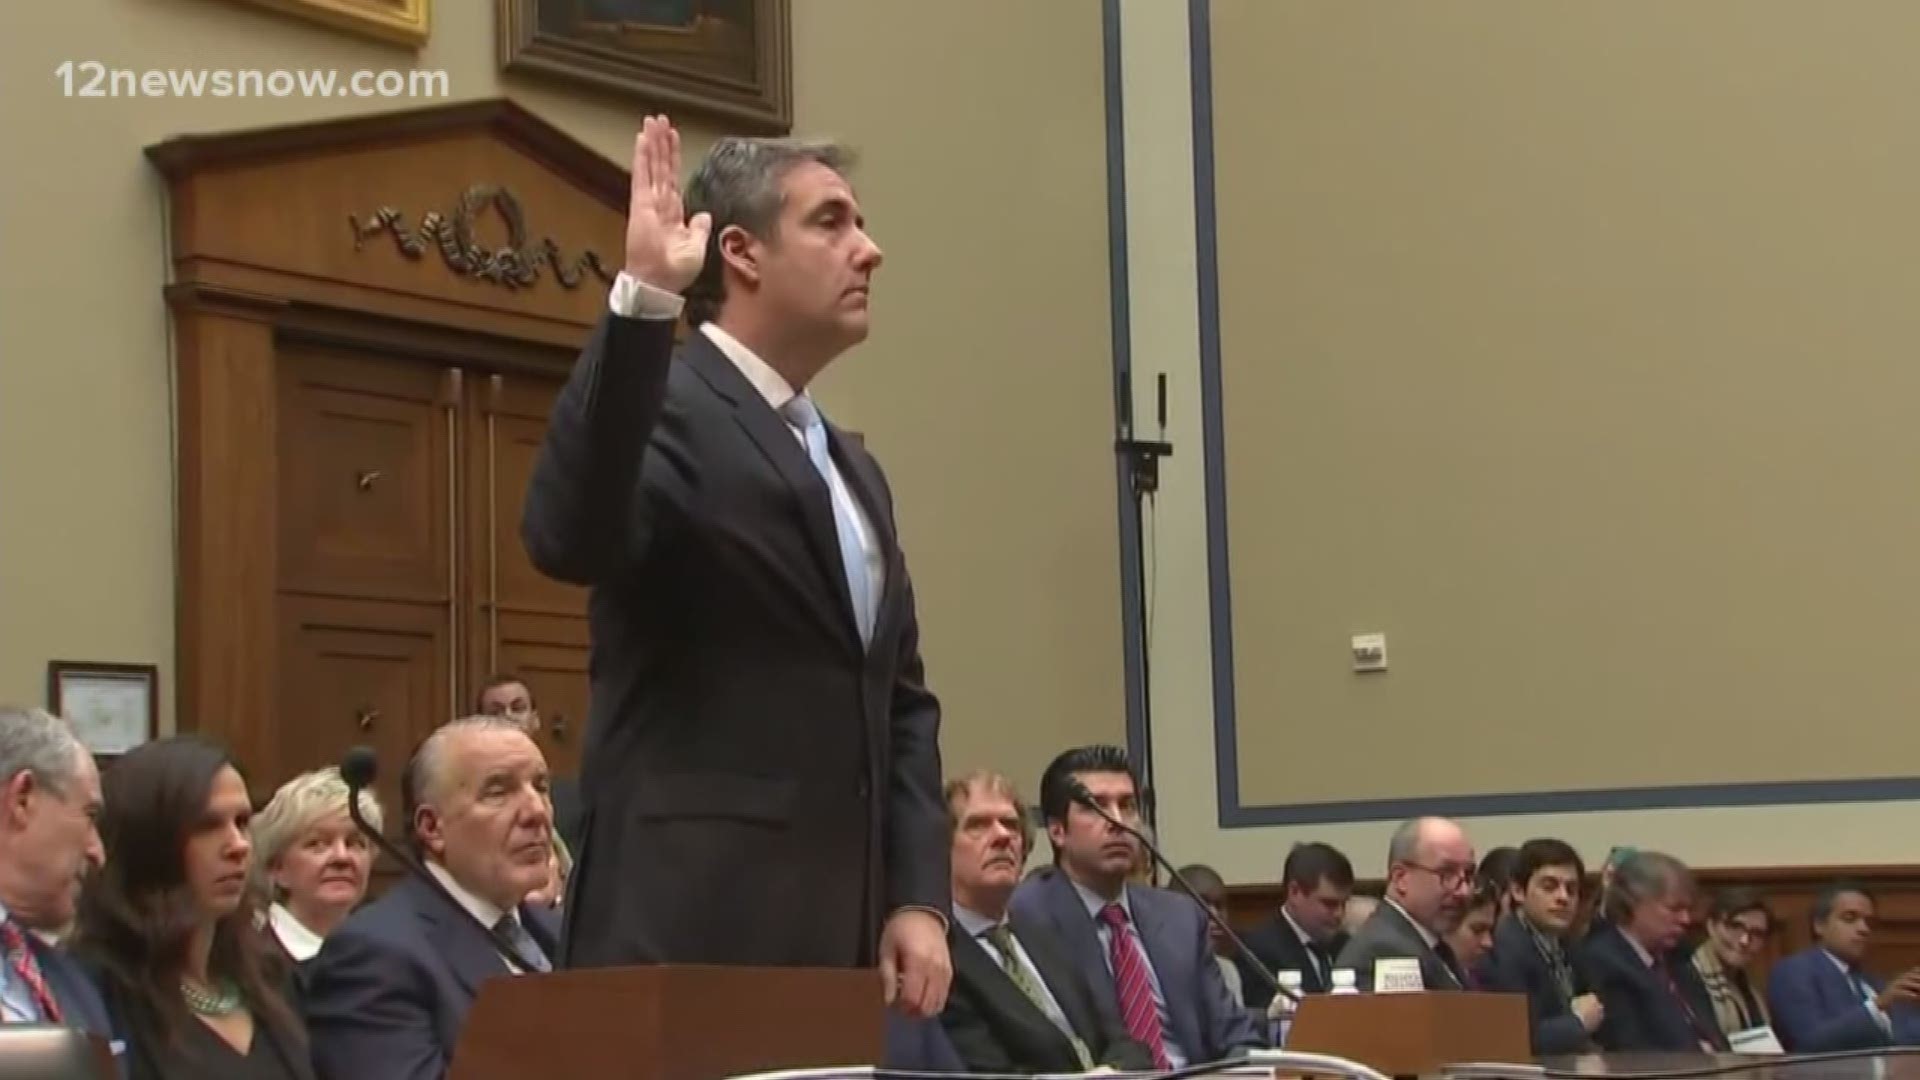 Michael Cohen testified for seven hours yesterday, where some of his many claims were that Trump knew about WikiLeaks and also made him lie about Stormy Daniels sex scandal. Republicans say Cohen is a habitual liar and point out that he has already plead guilty to lying to congress before. Cohen will testify in private today.